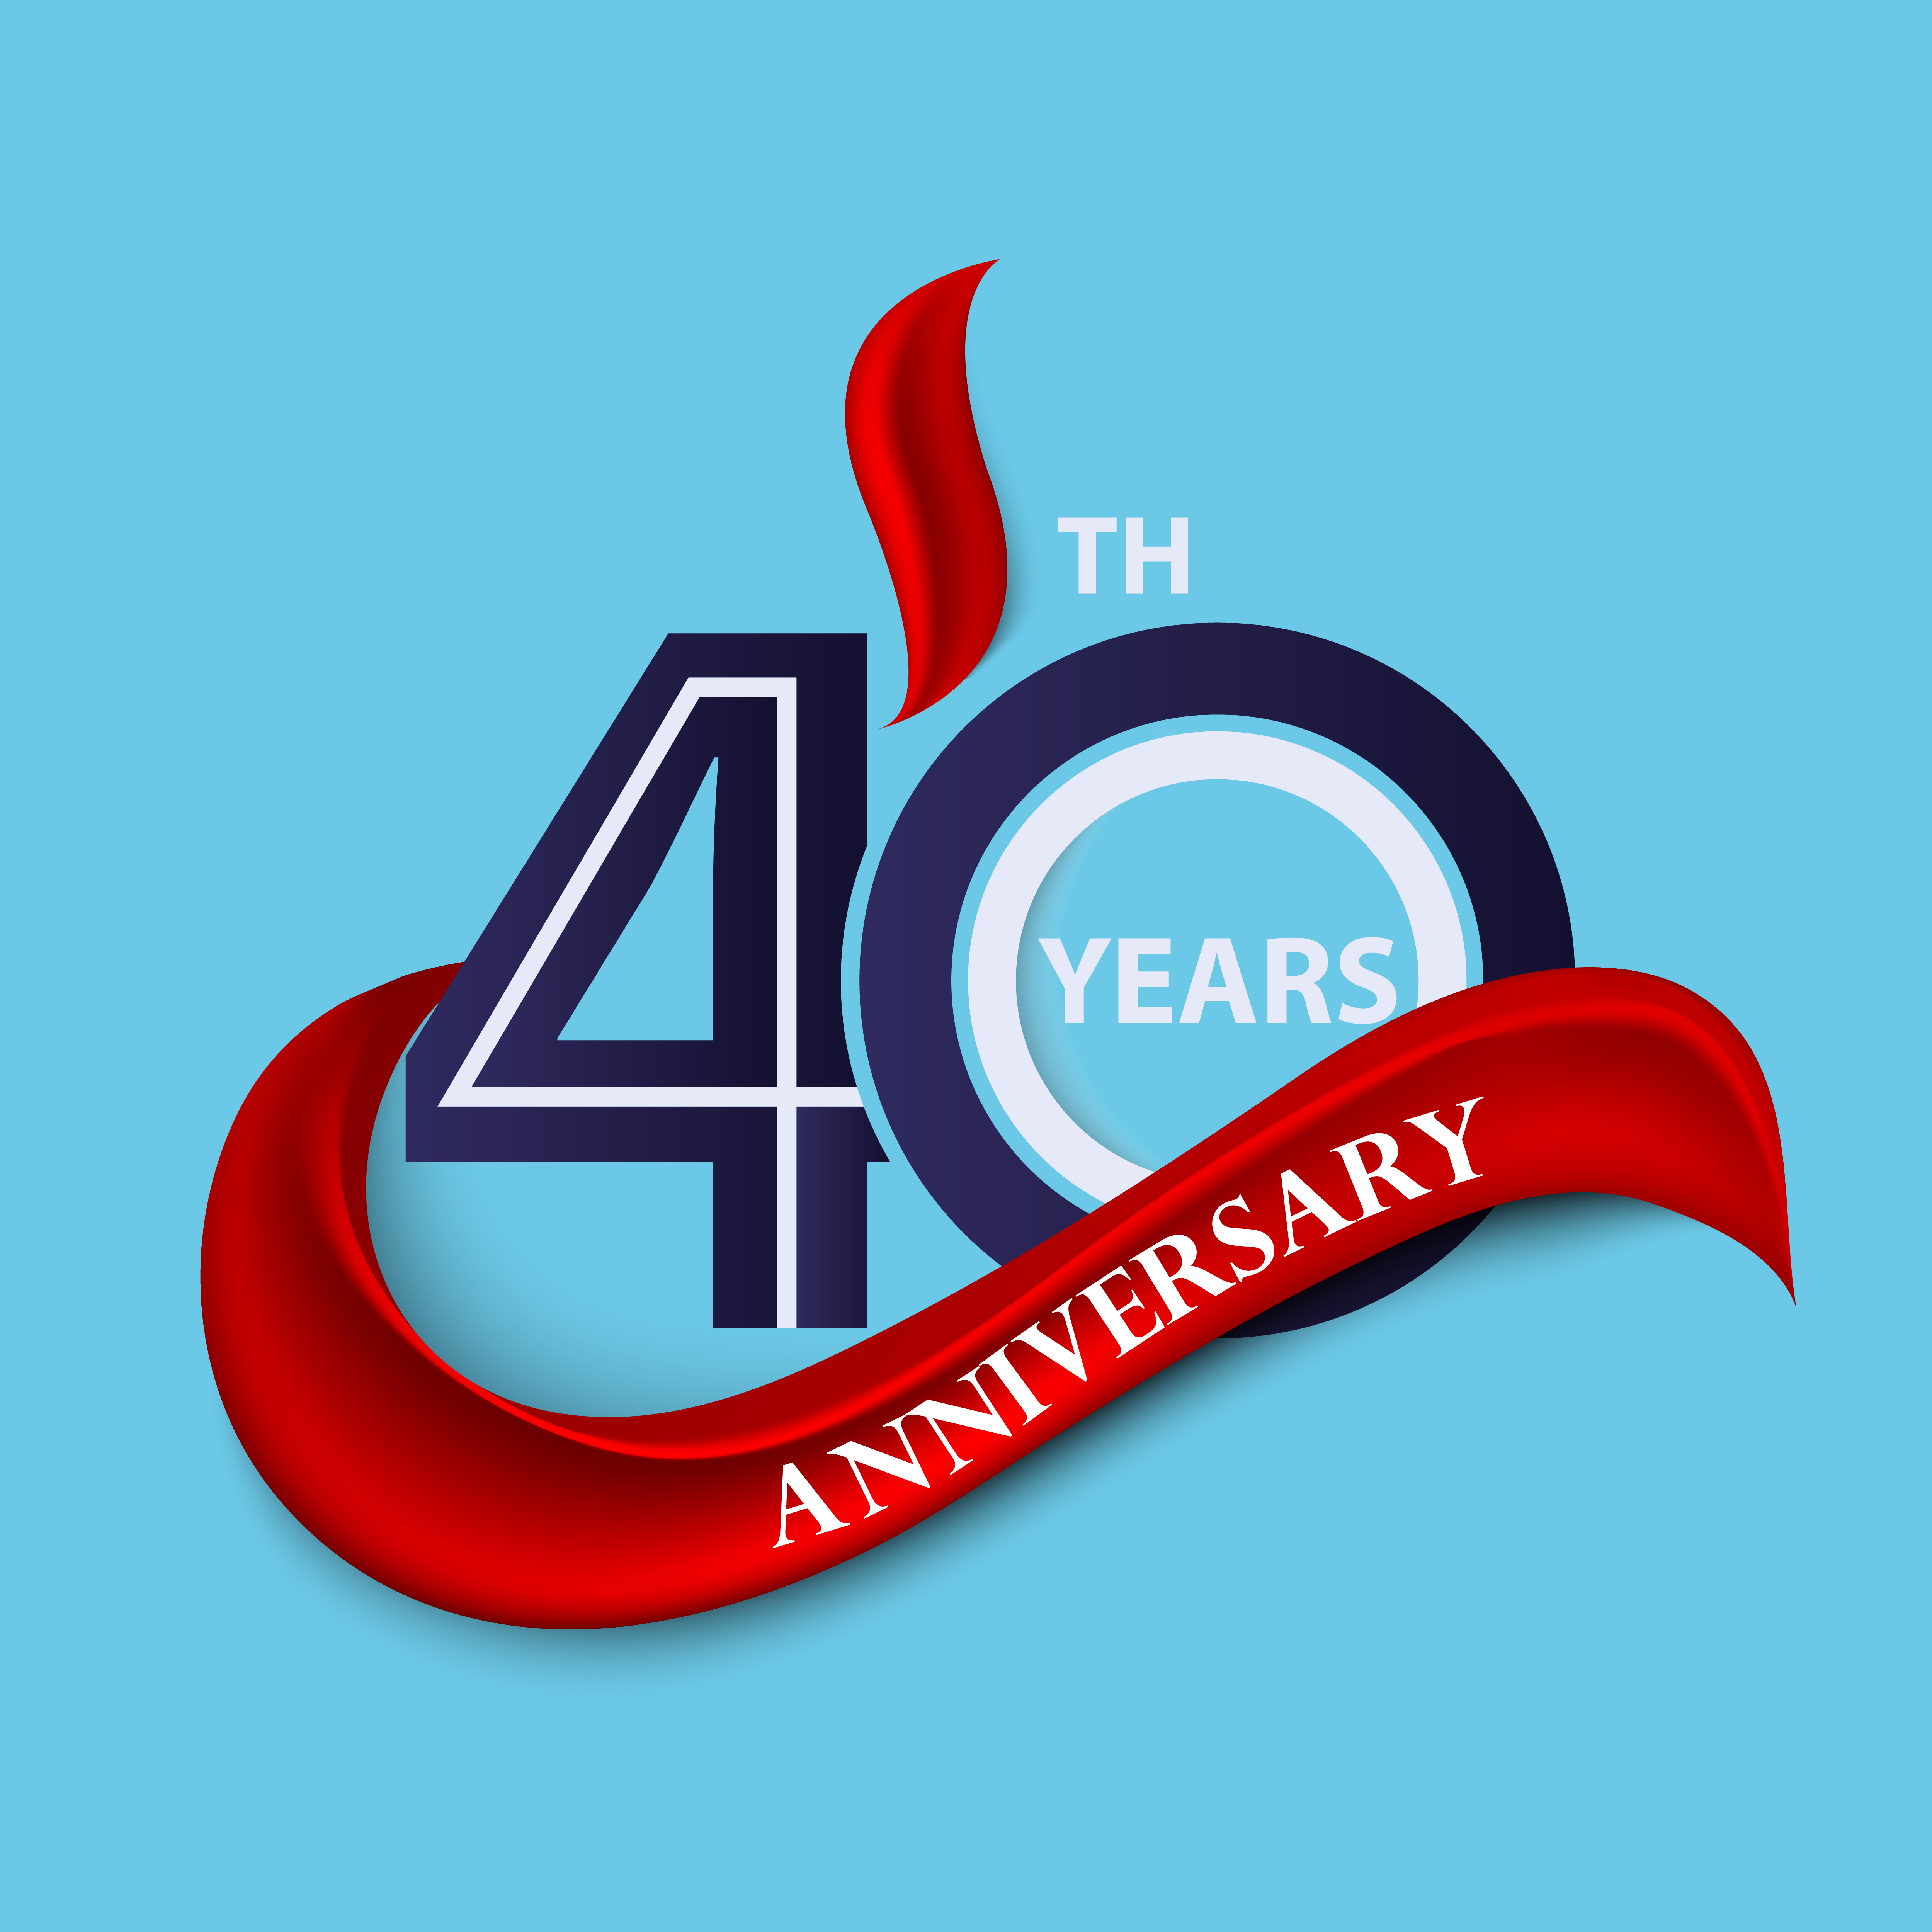 40th Anniversary Sign And Logo Celebration Symbol With Red Ribbon 